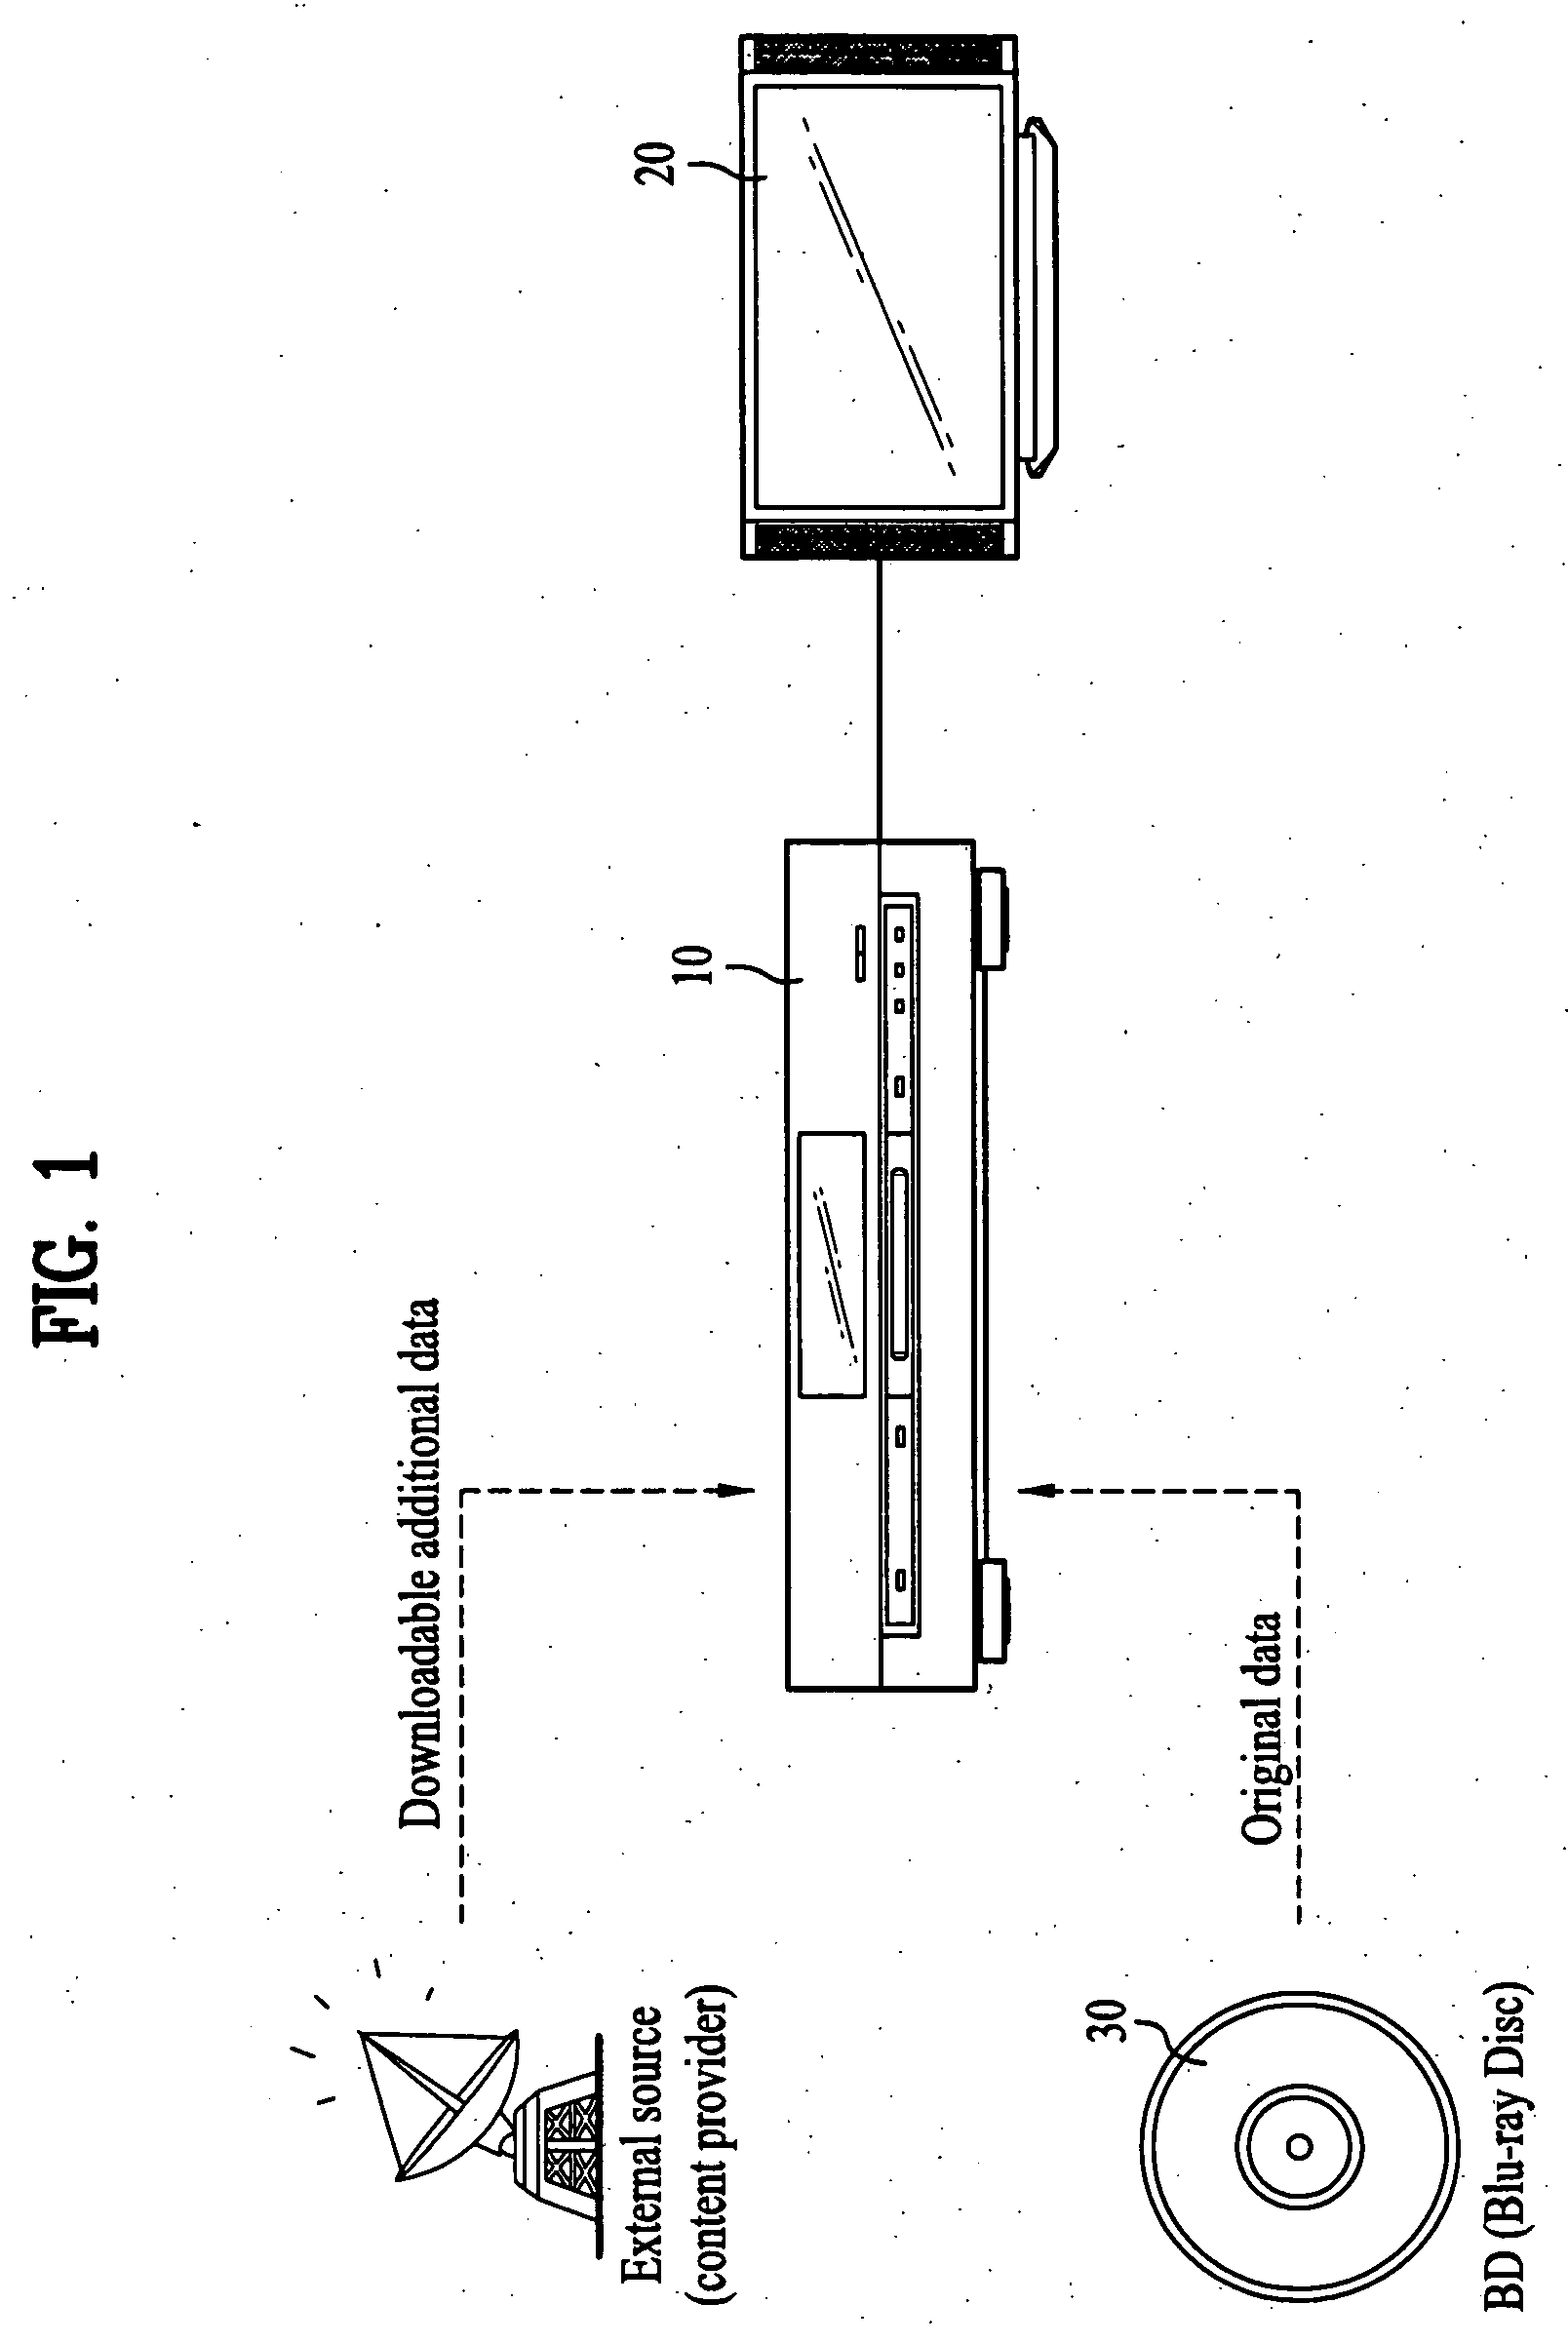 Method and apparatus for reproducing data from recording medium using local storage